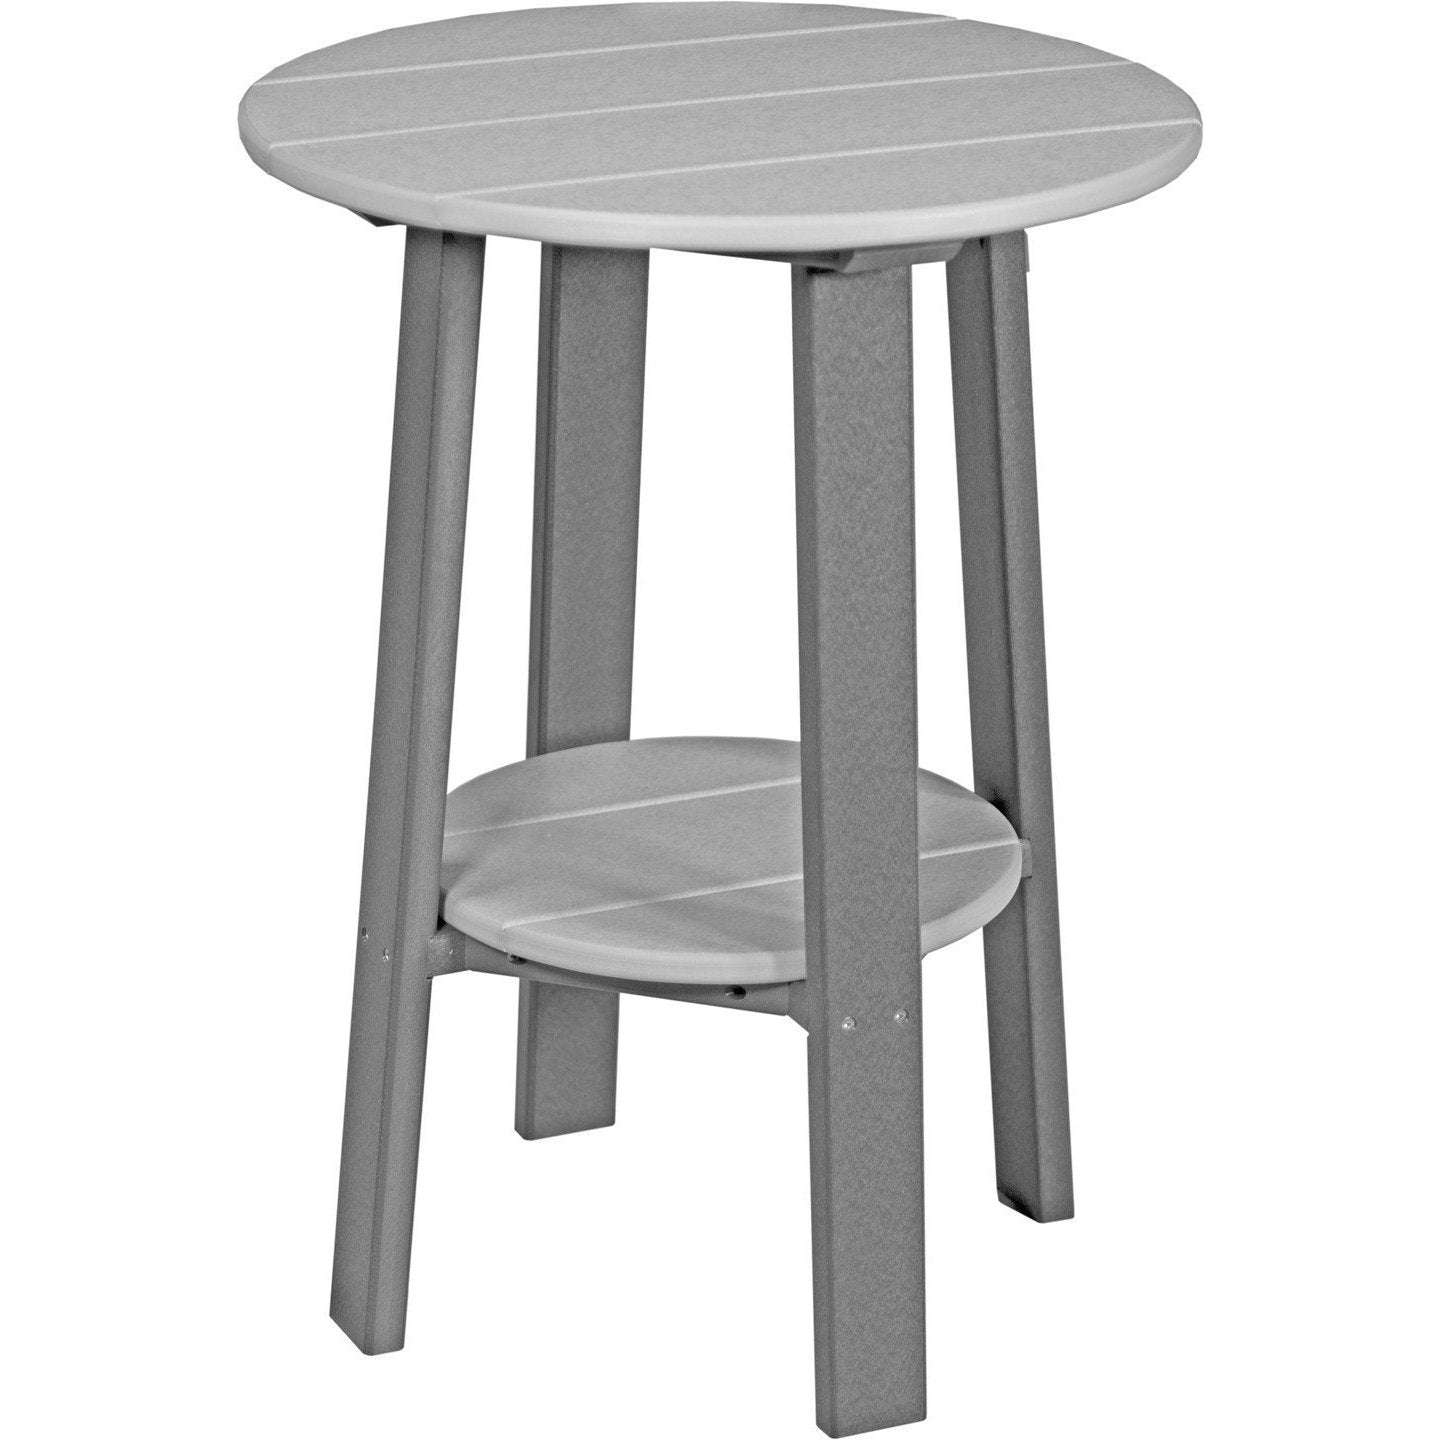 Outdoor 28" Deluxe End Table   Dove Grey & Slate